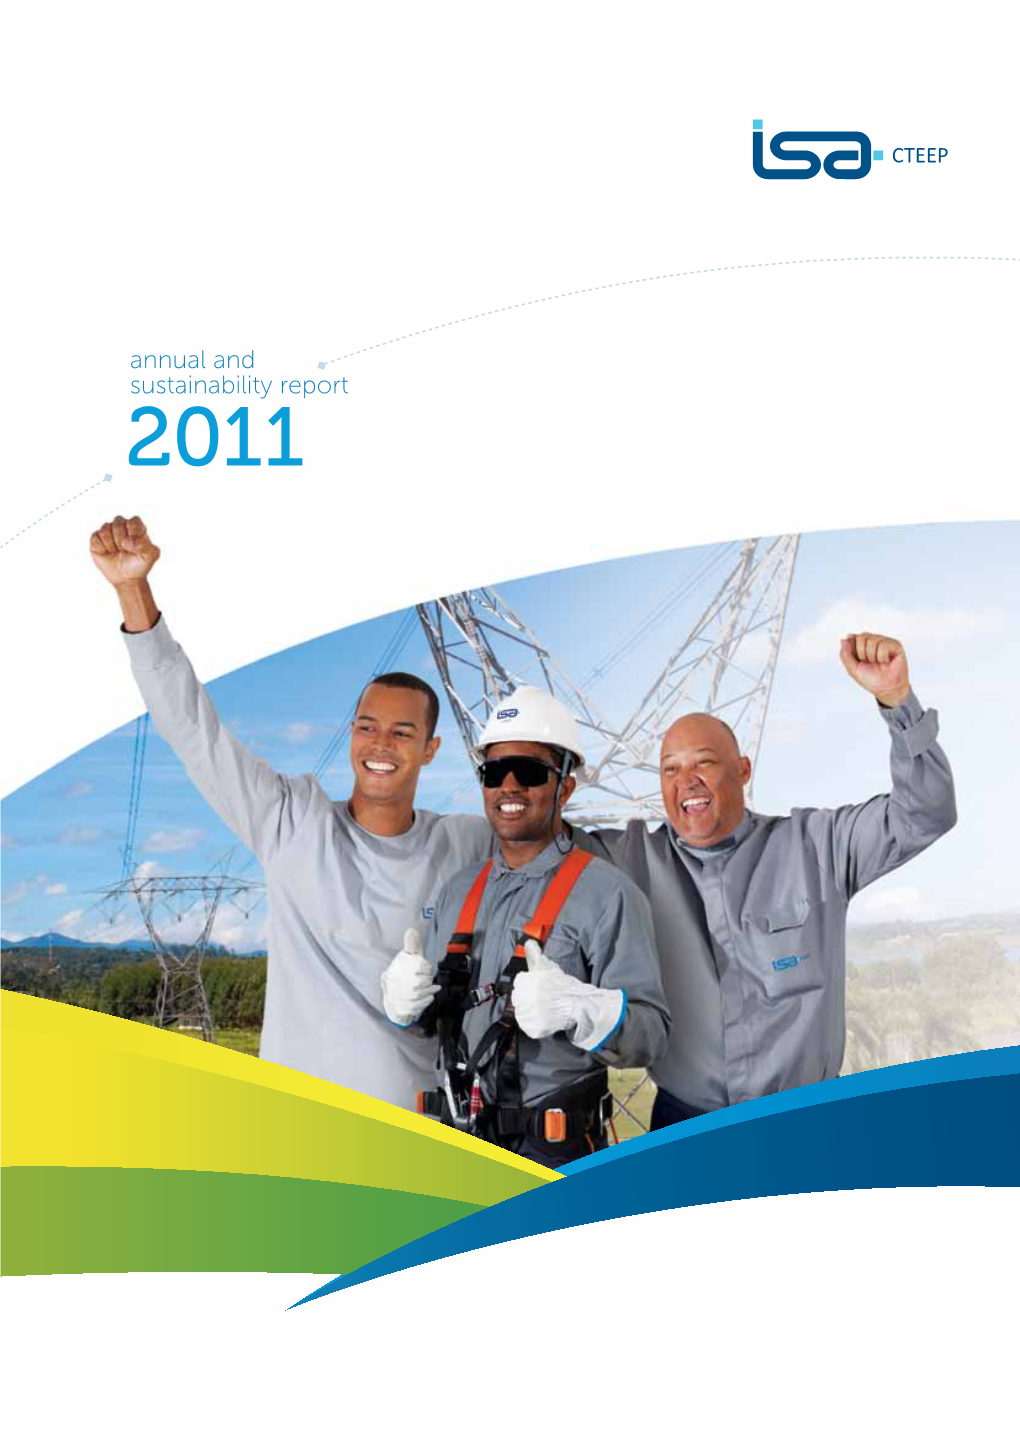 Annual and Sustainability Report 2011 Main Indicators